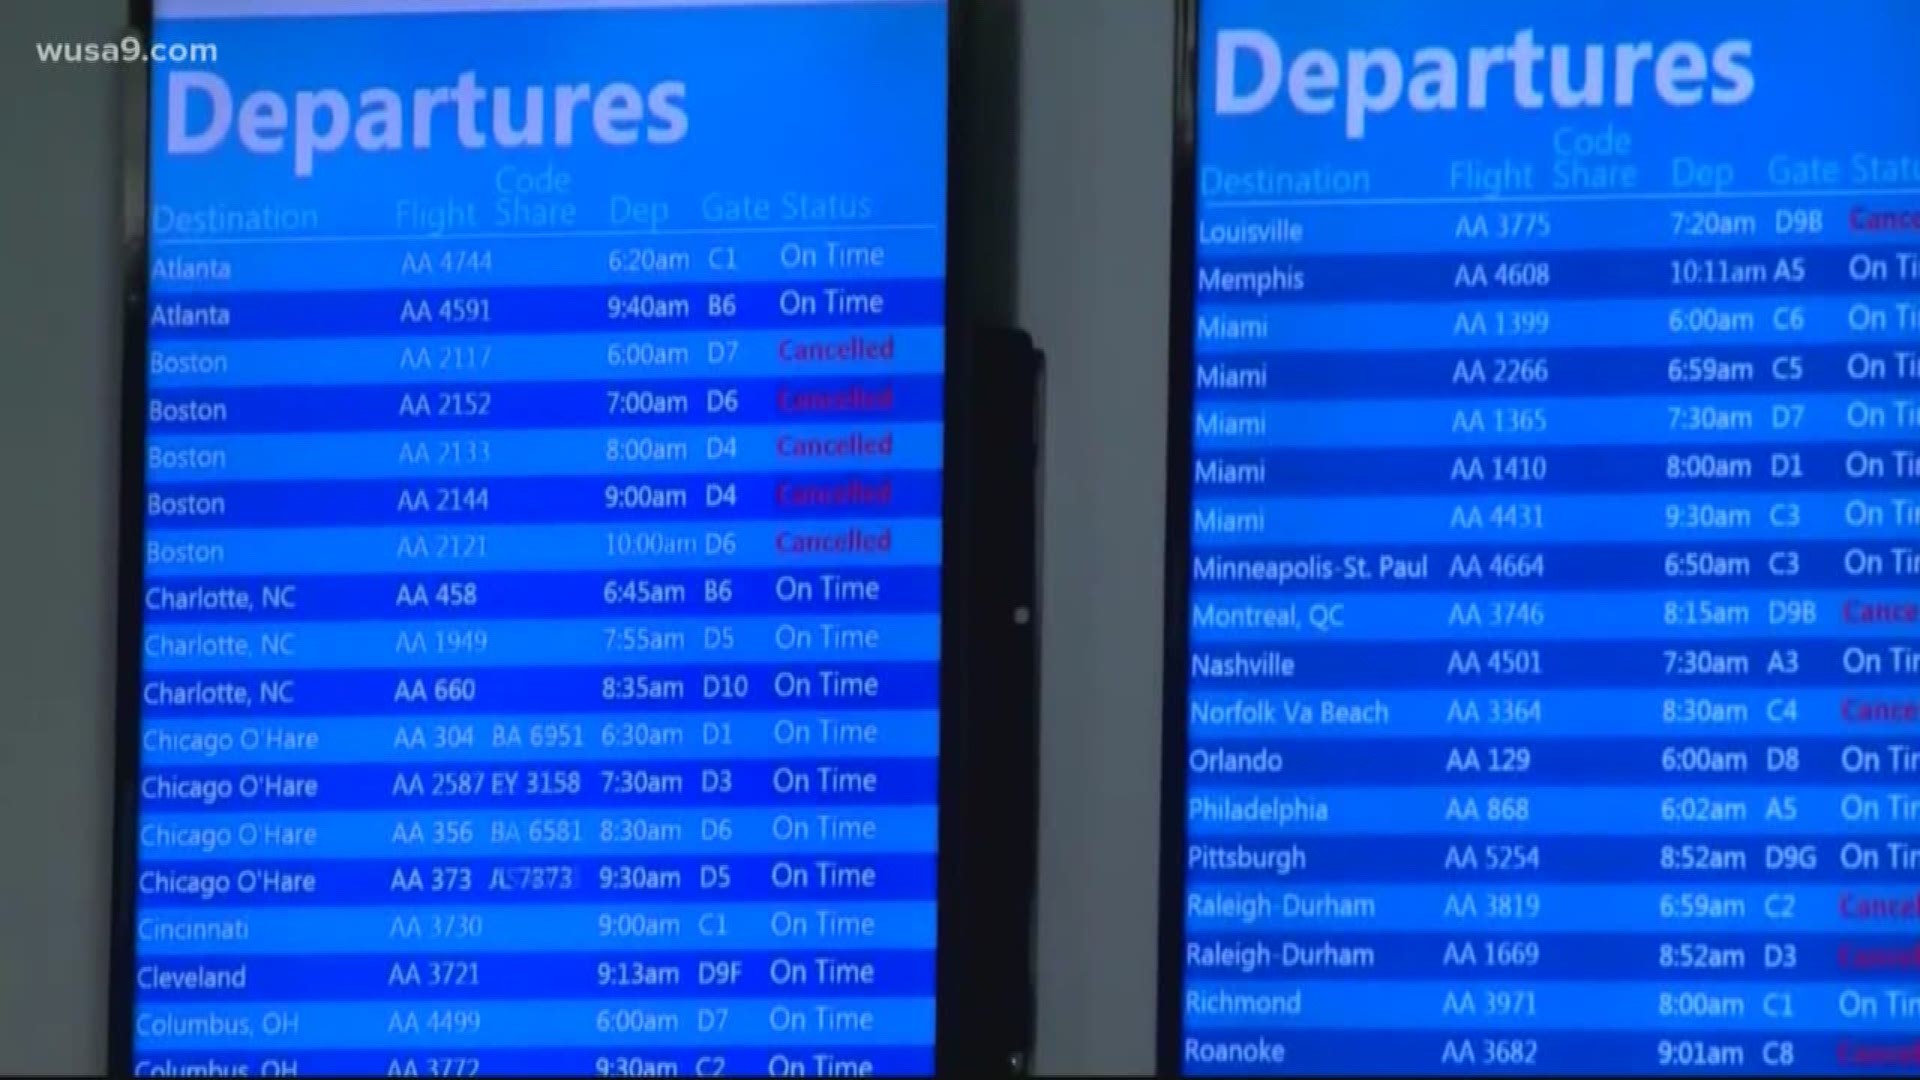 The travel concerns behind the coronavirus outbreak have affected the travel industry. A travel agency said some people are benefiting from the low flight prices.